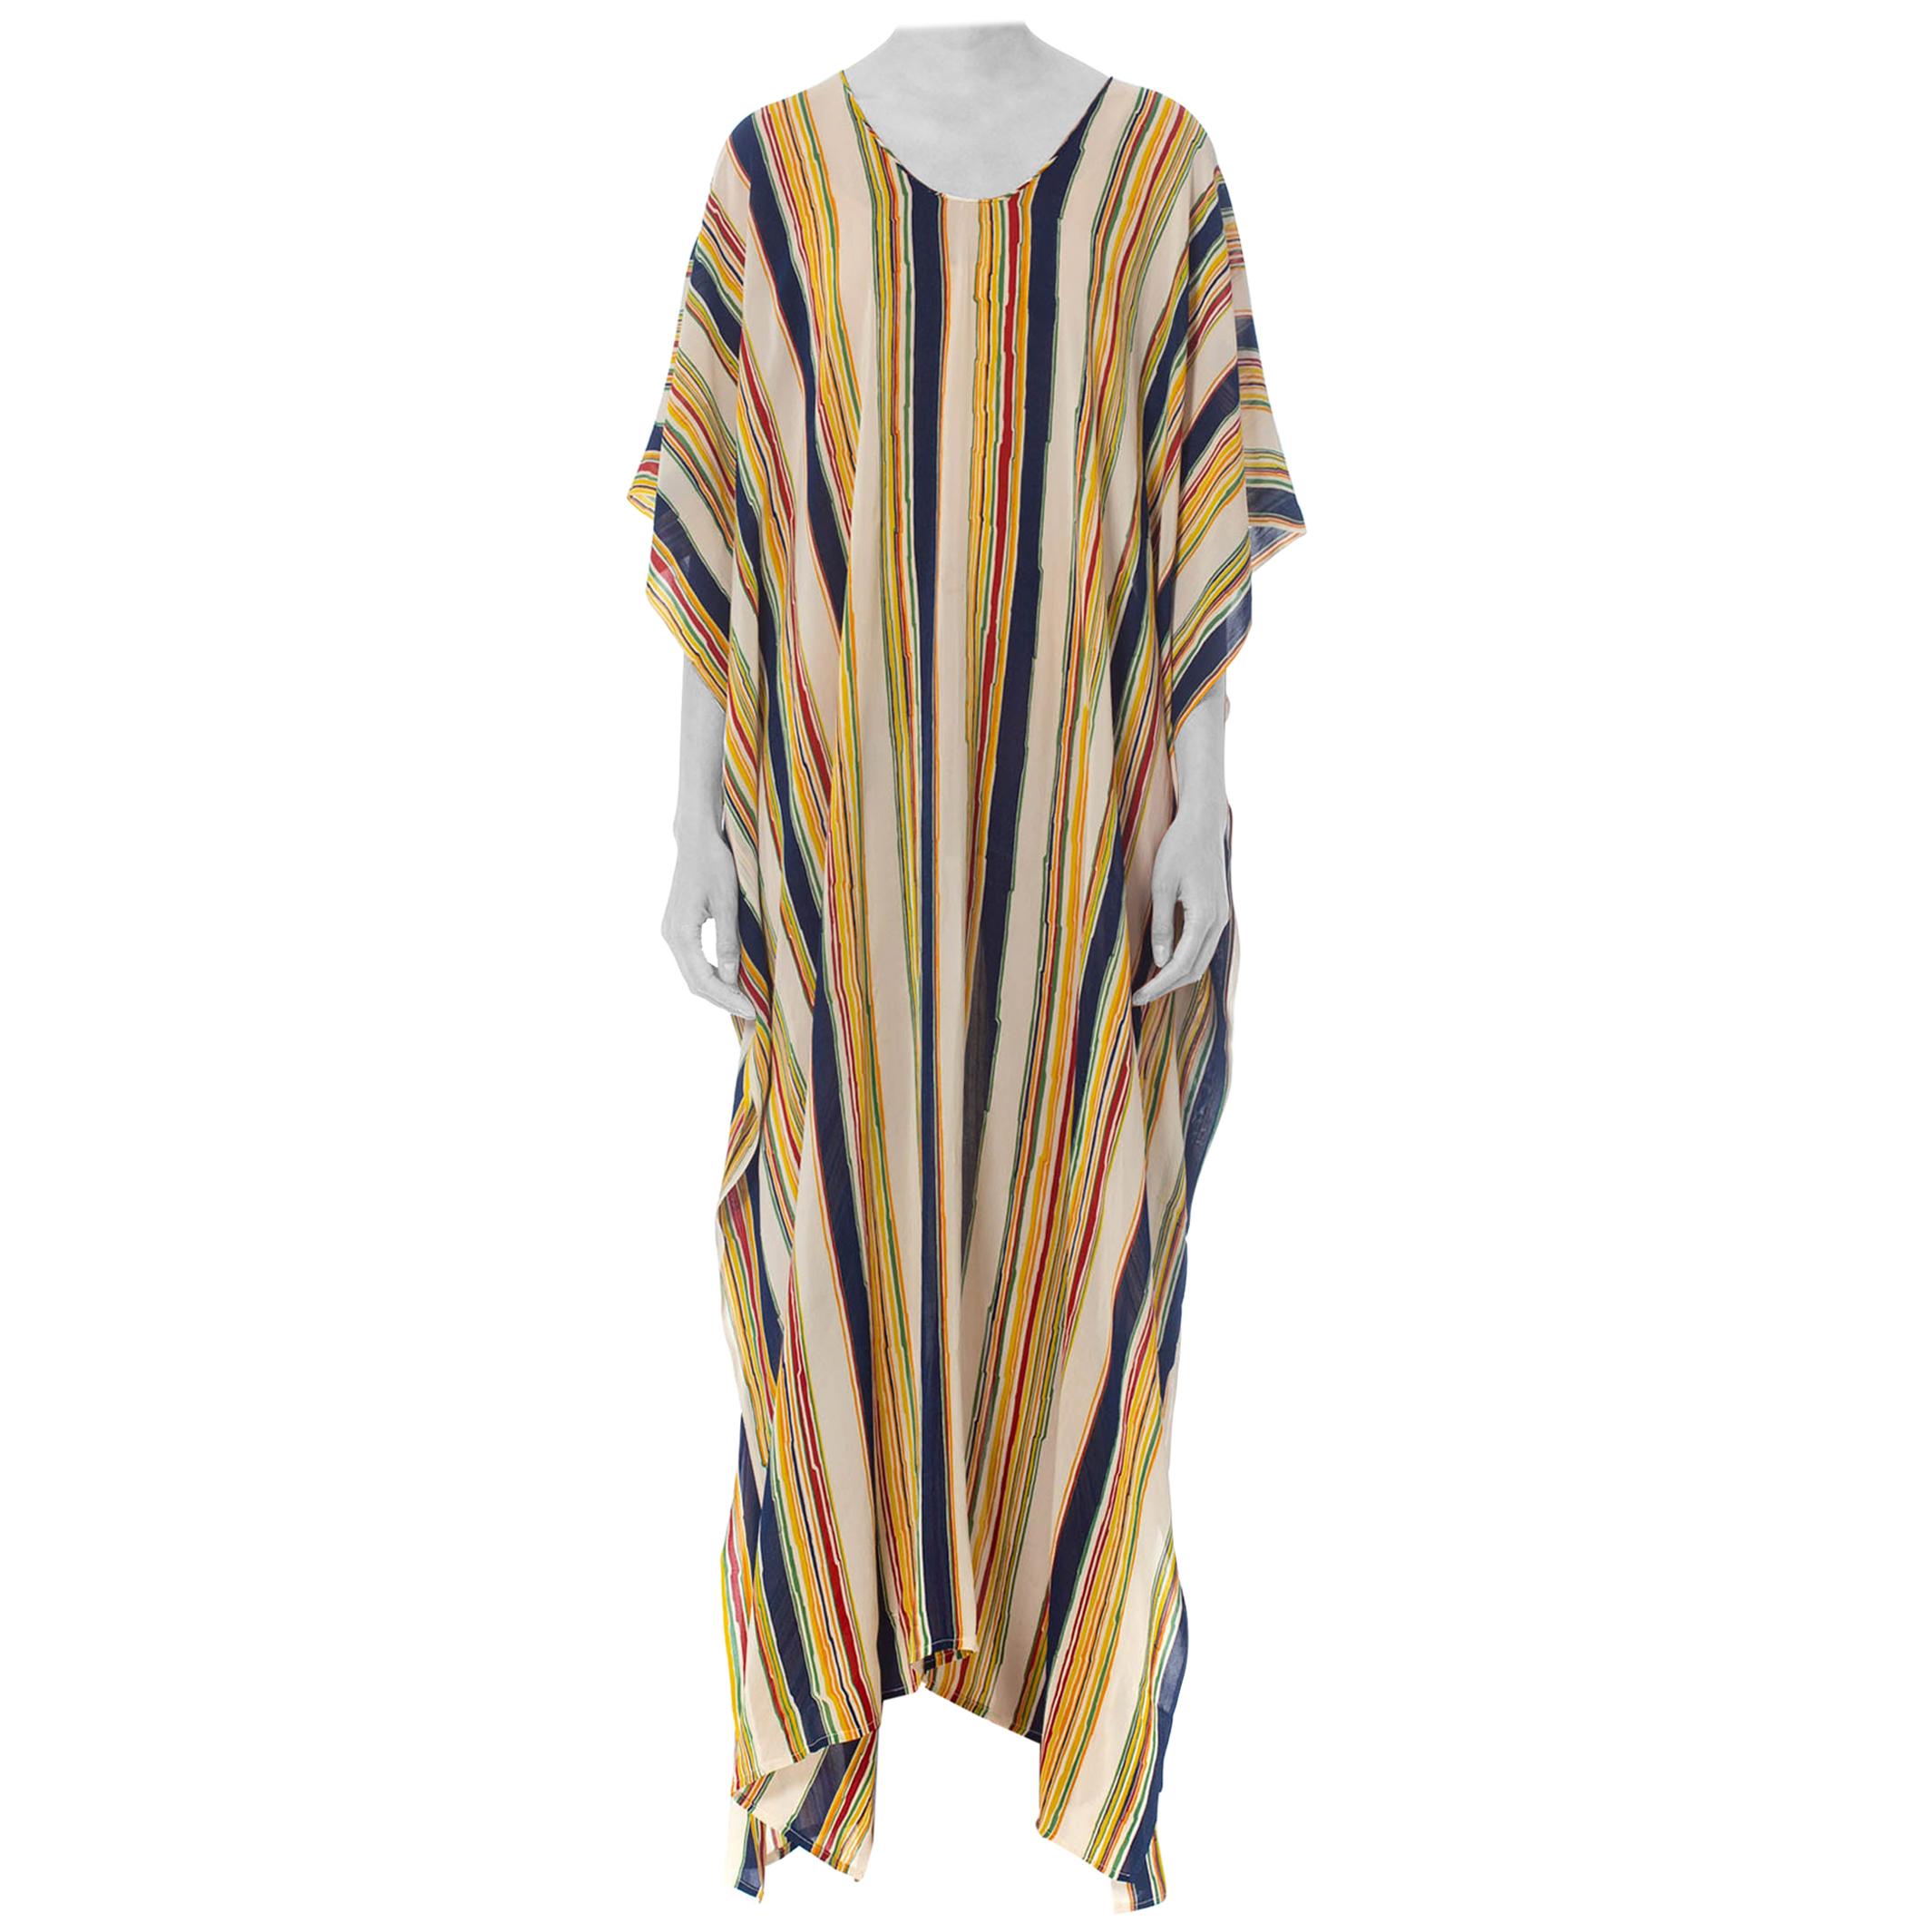 MORPHEW COLLECTION Silk Crepe De Chine Kaftan Made From Vintage 70S Striped Fab